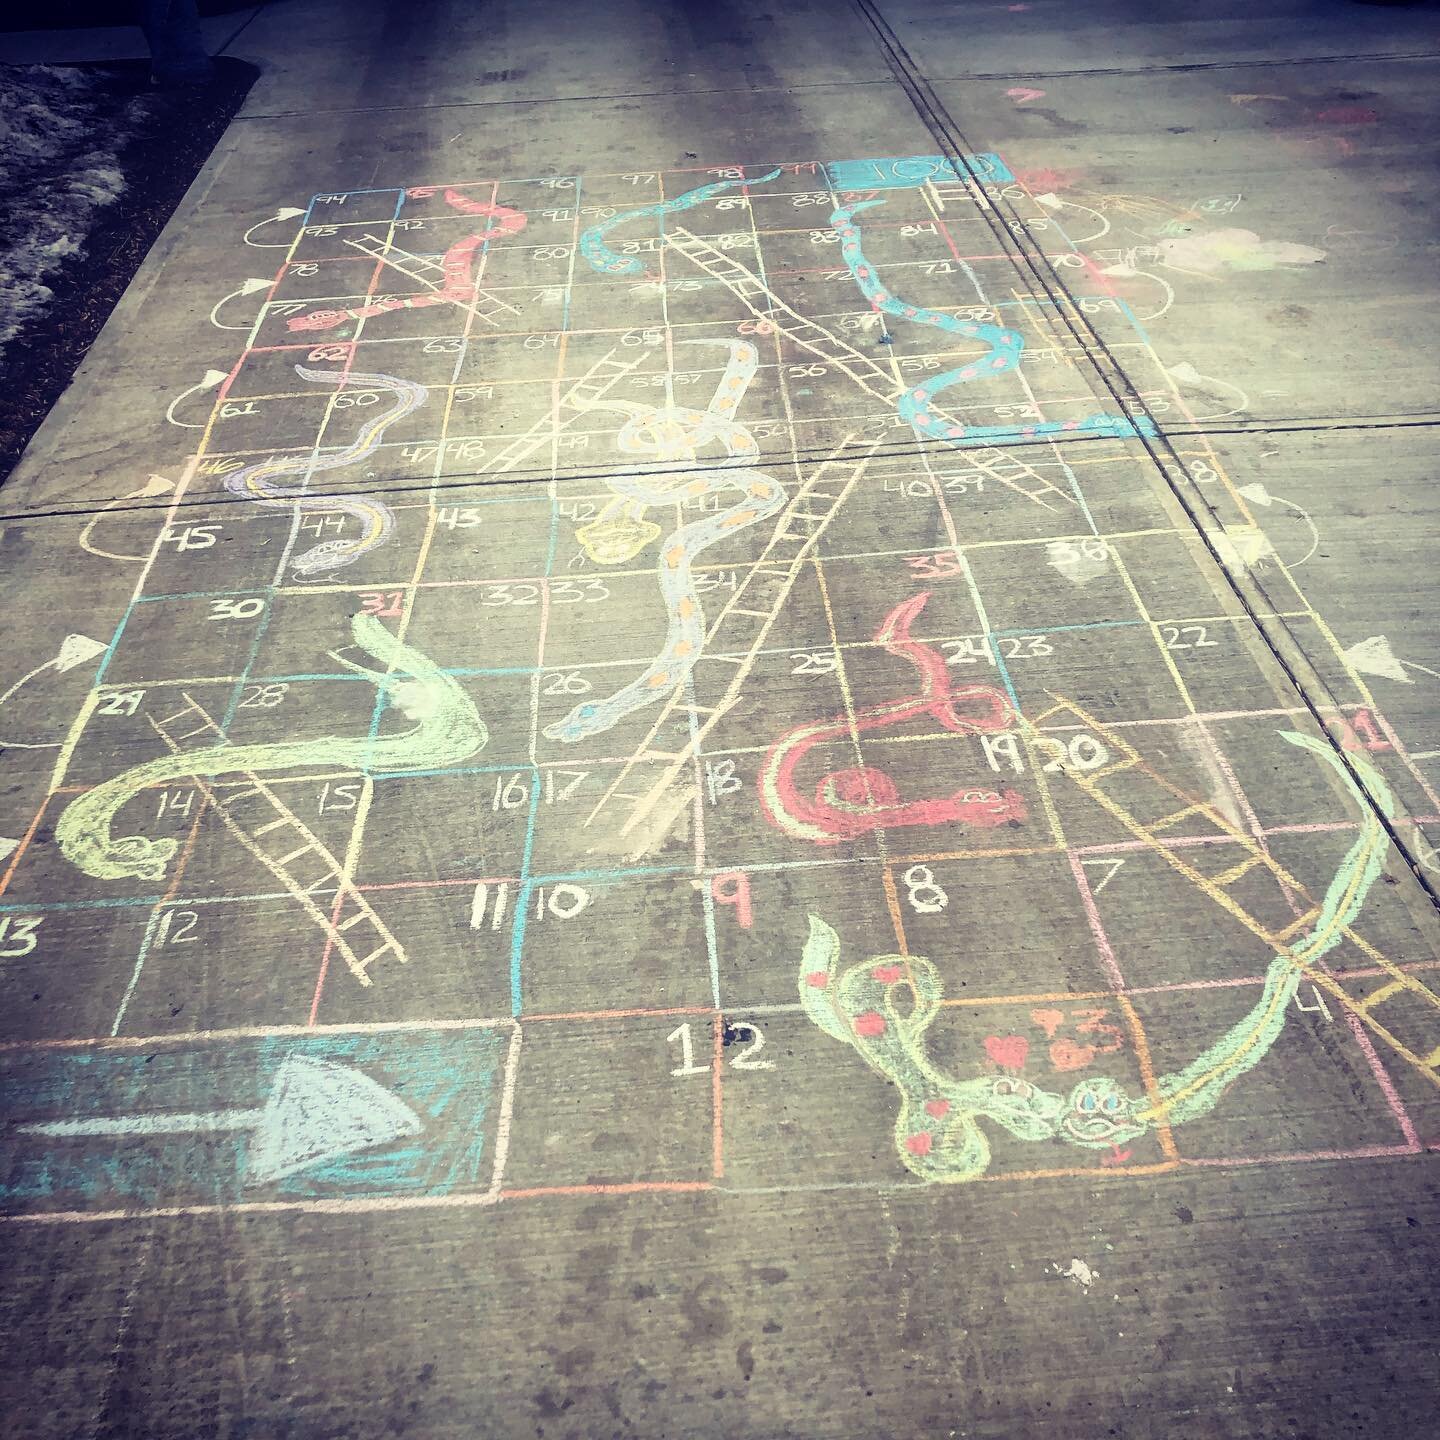 So we are one week away from the one year anniversary of the national lockdown for COVID-19. We made a giant snakes and ladder game in March 2020 and have done it again March 2021. 
Who knew one year later we would still be in the midst of a global p